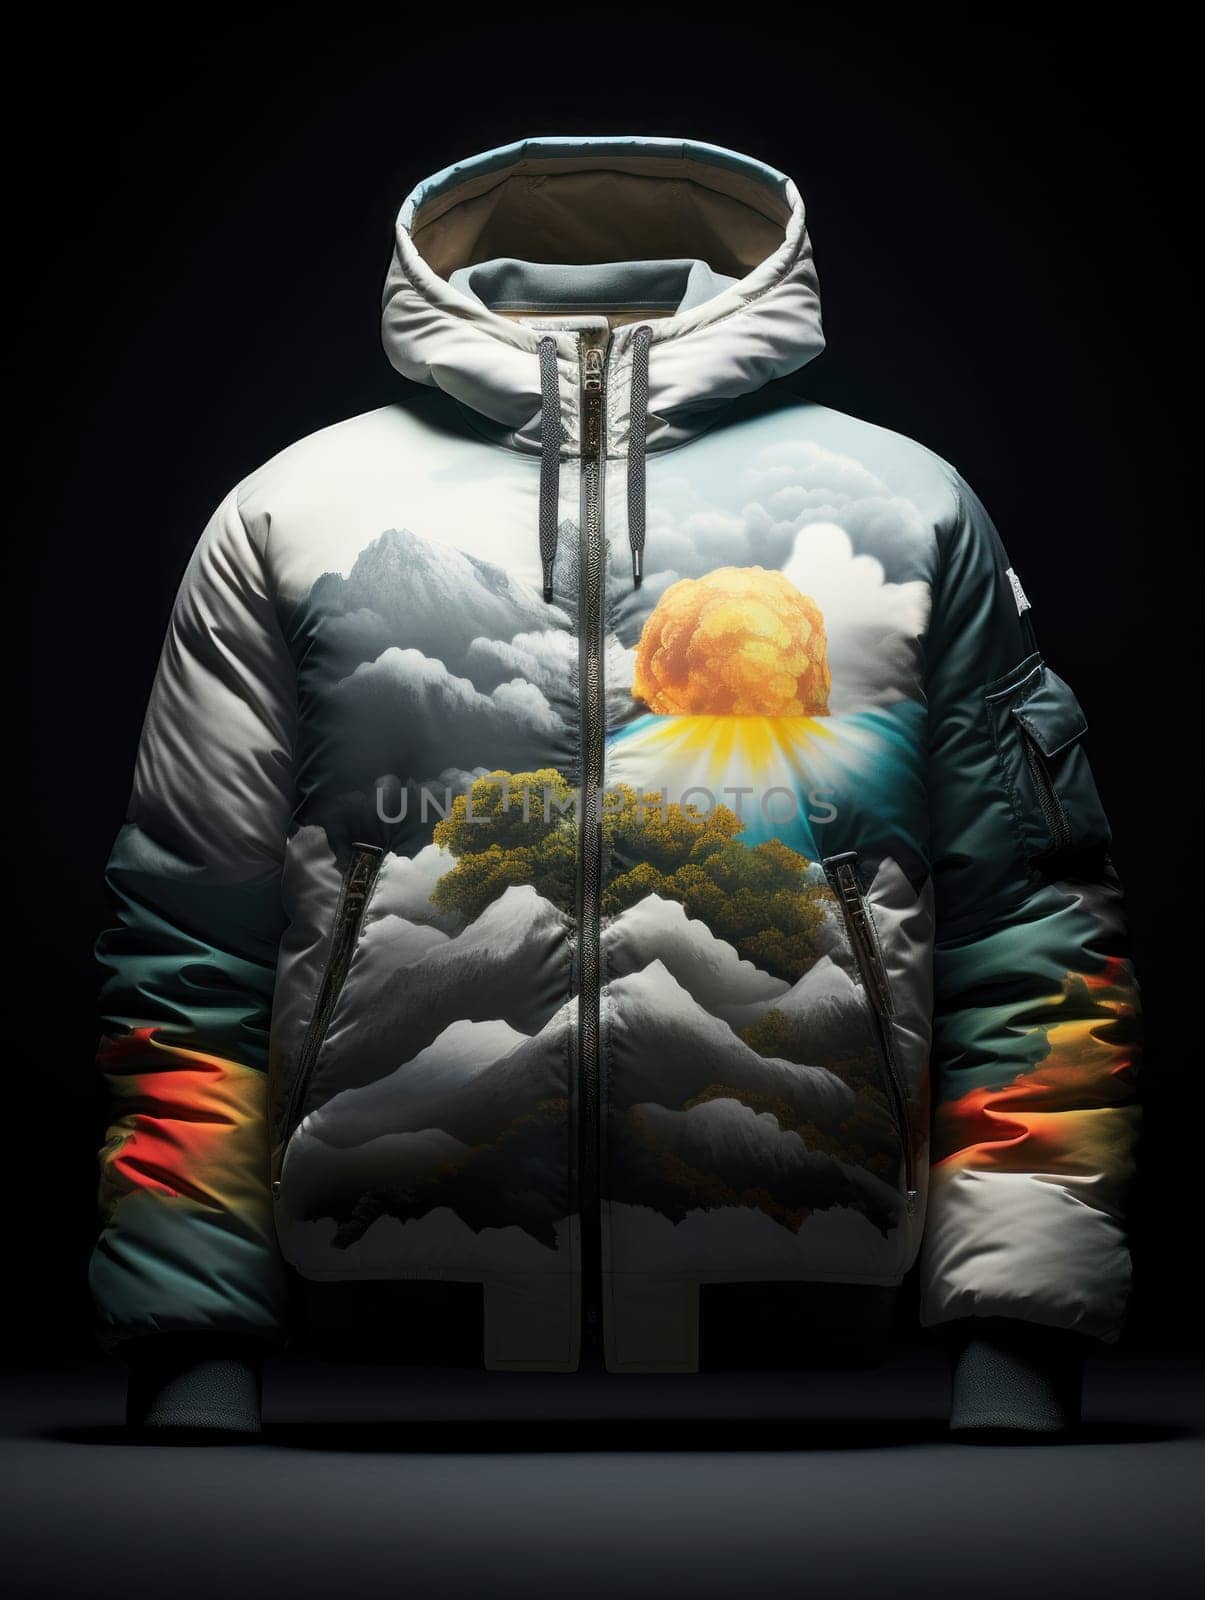 A jacket with a colorful sky and clouds on it